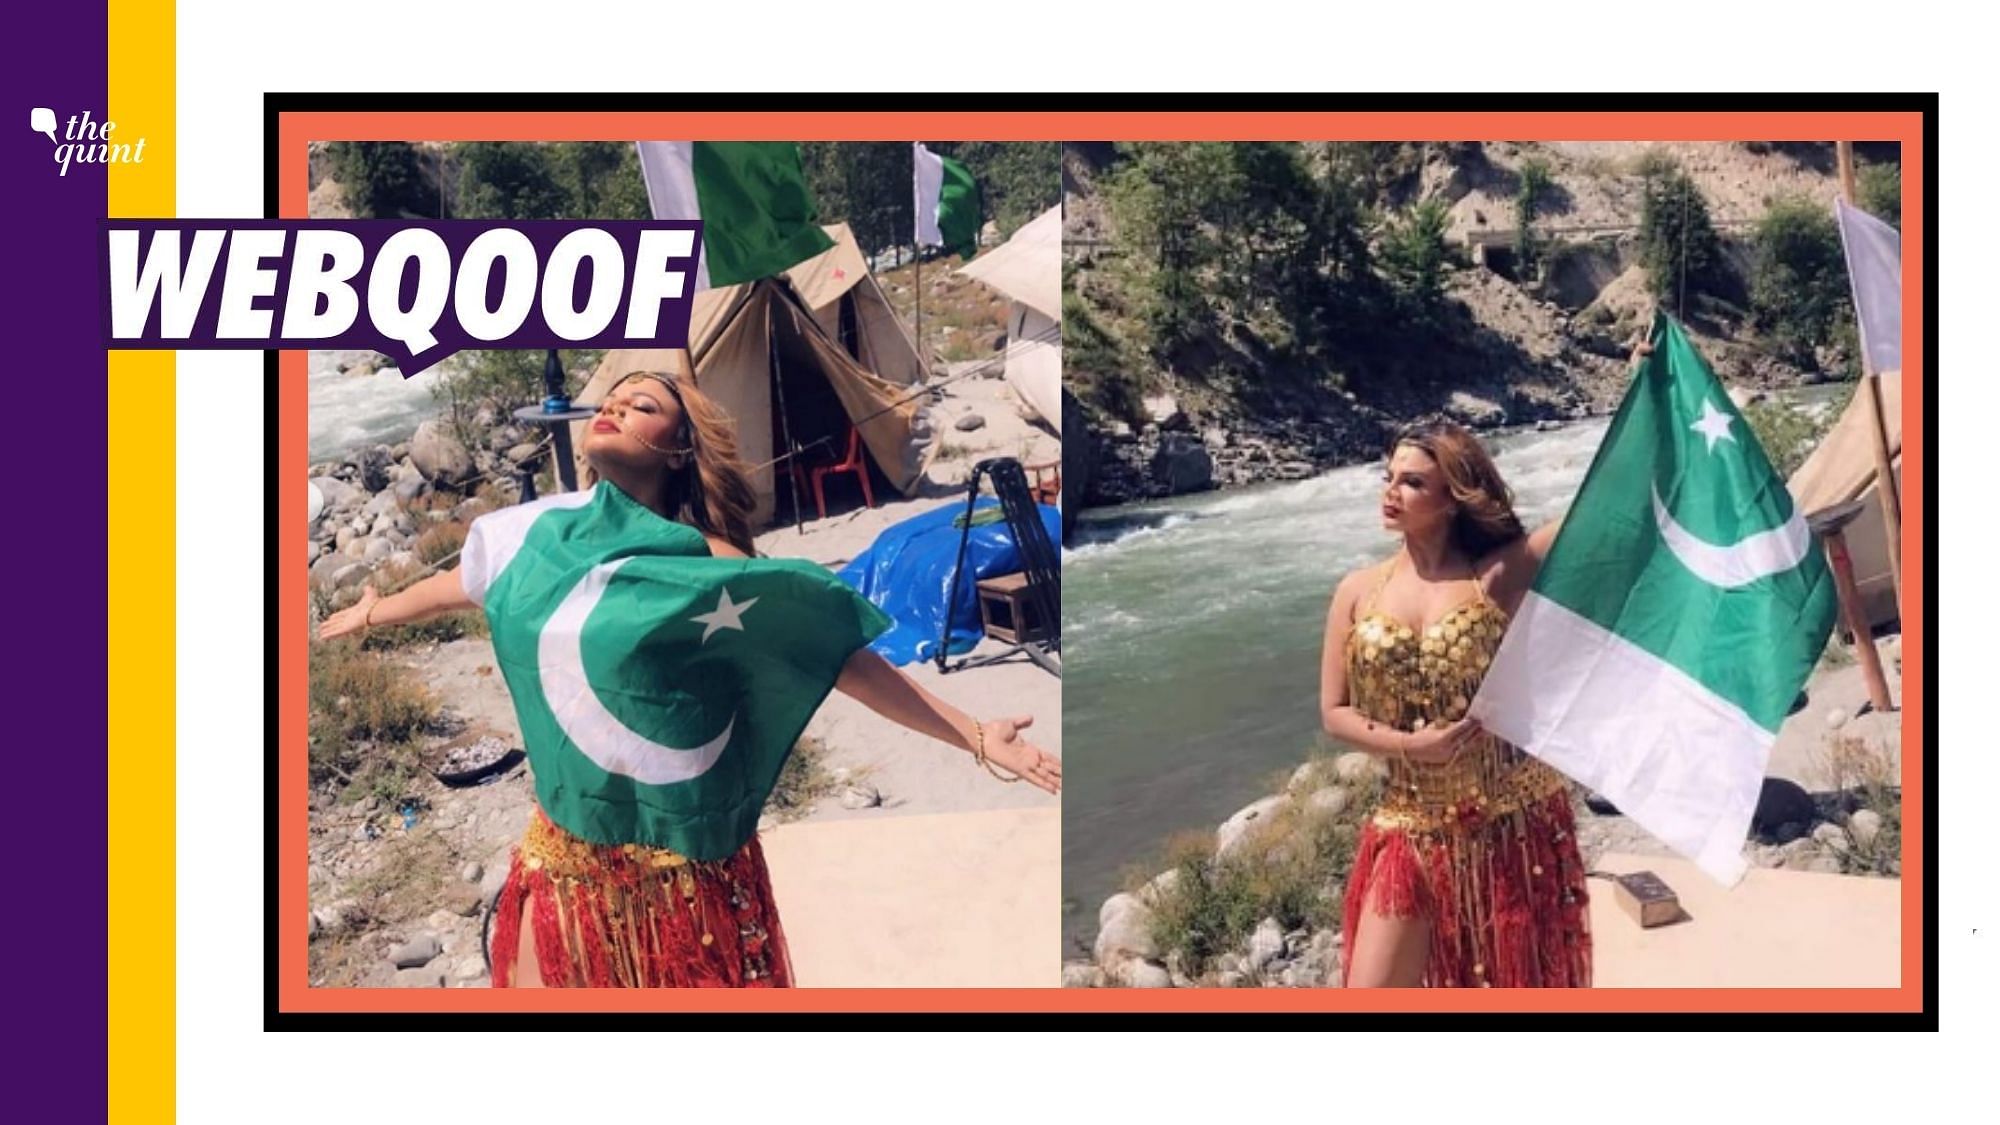 Old images of actor Rakhi Sawant from the sets of film ‘Mudda 370 J&amp;K’ have been revived with misleading claims.